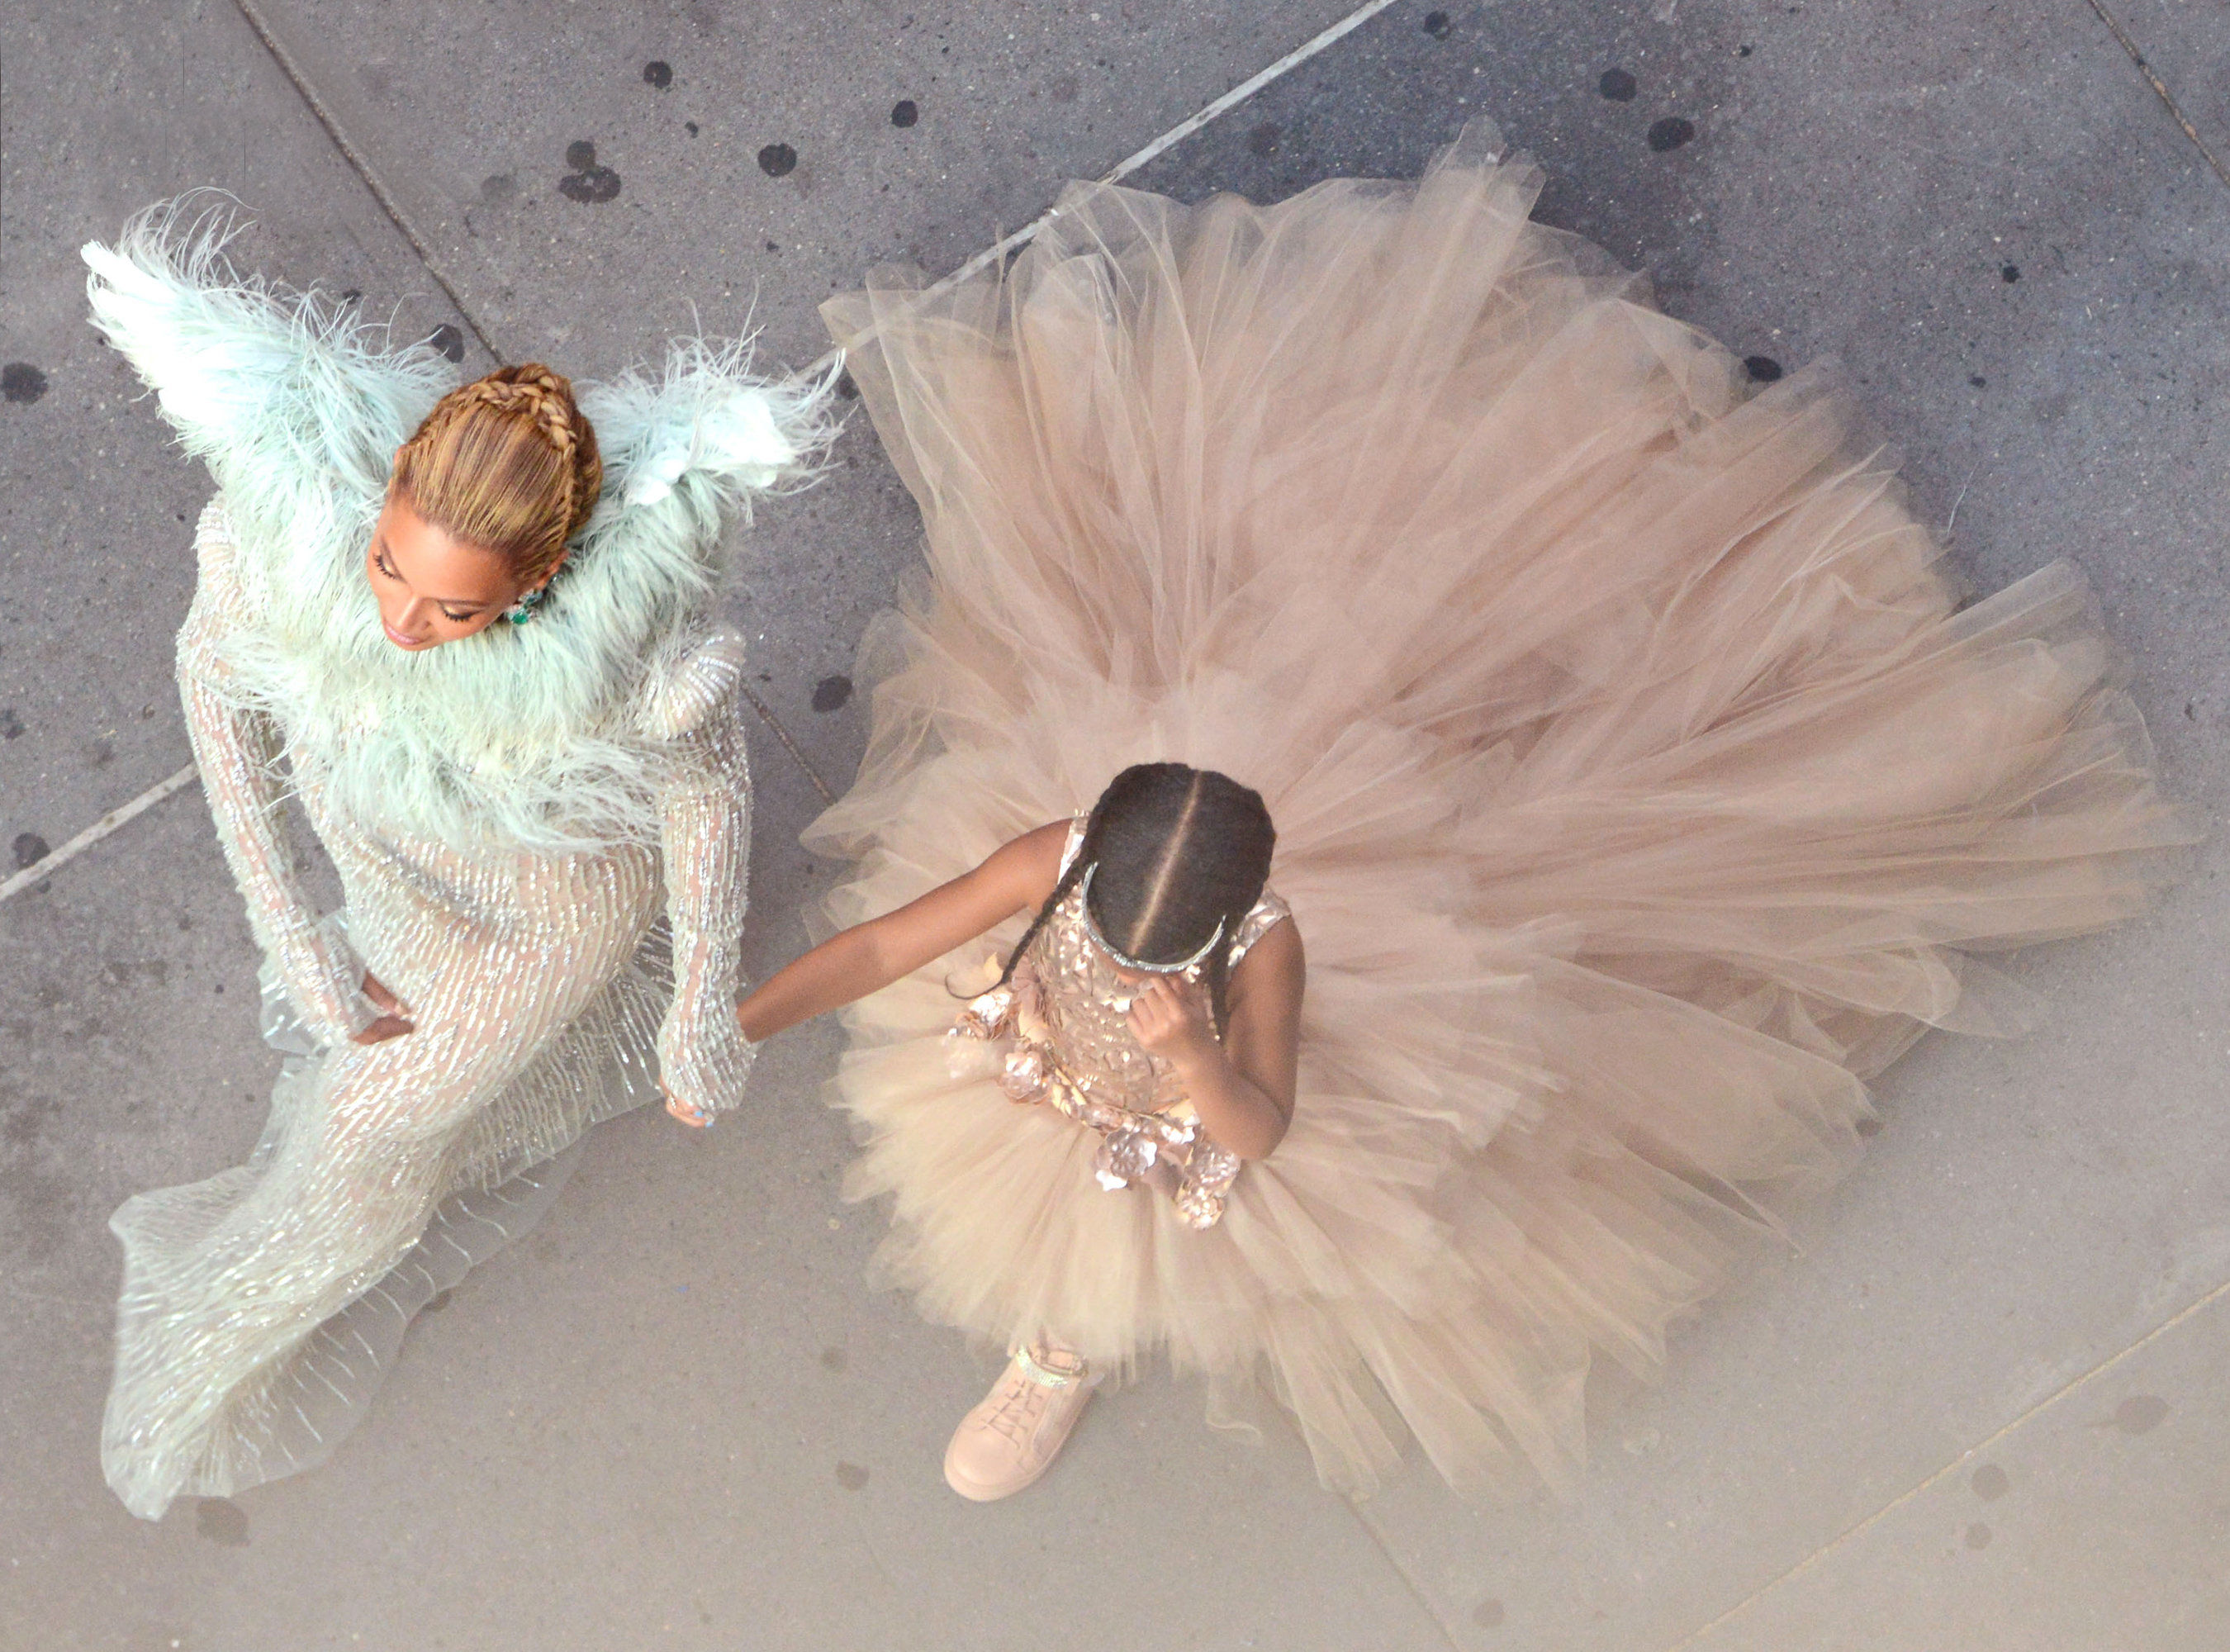 VMA - Blue Ivy & Beyonce Embed 2